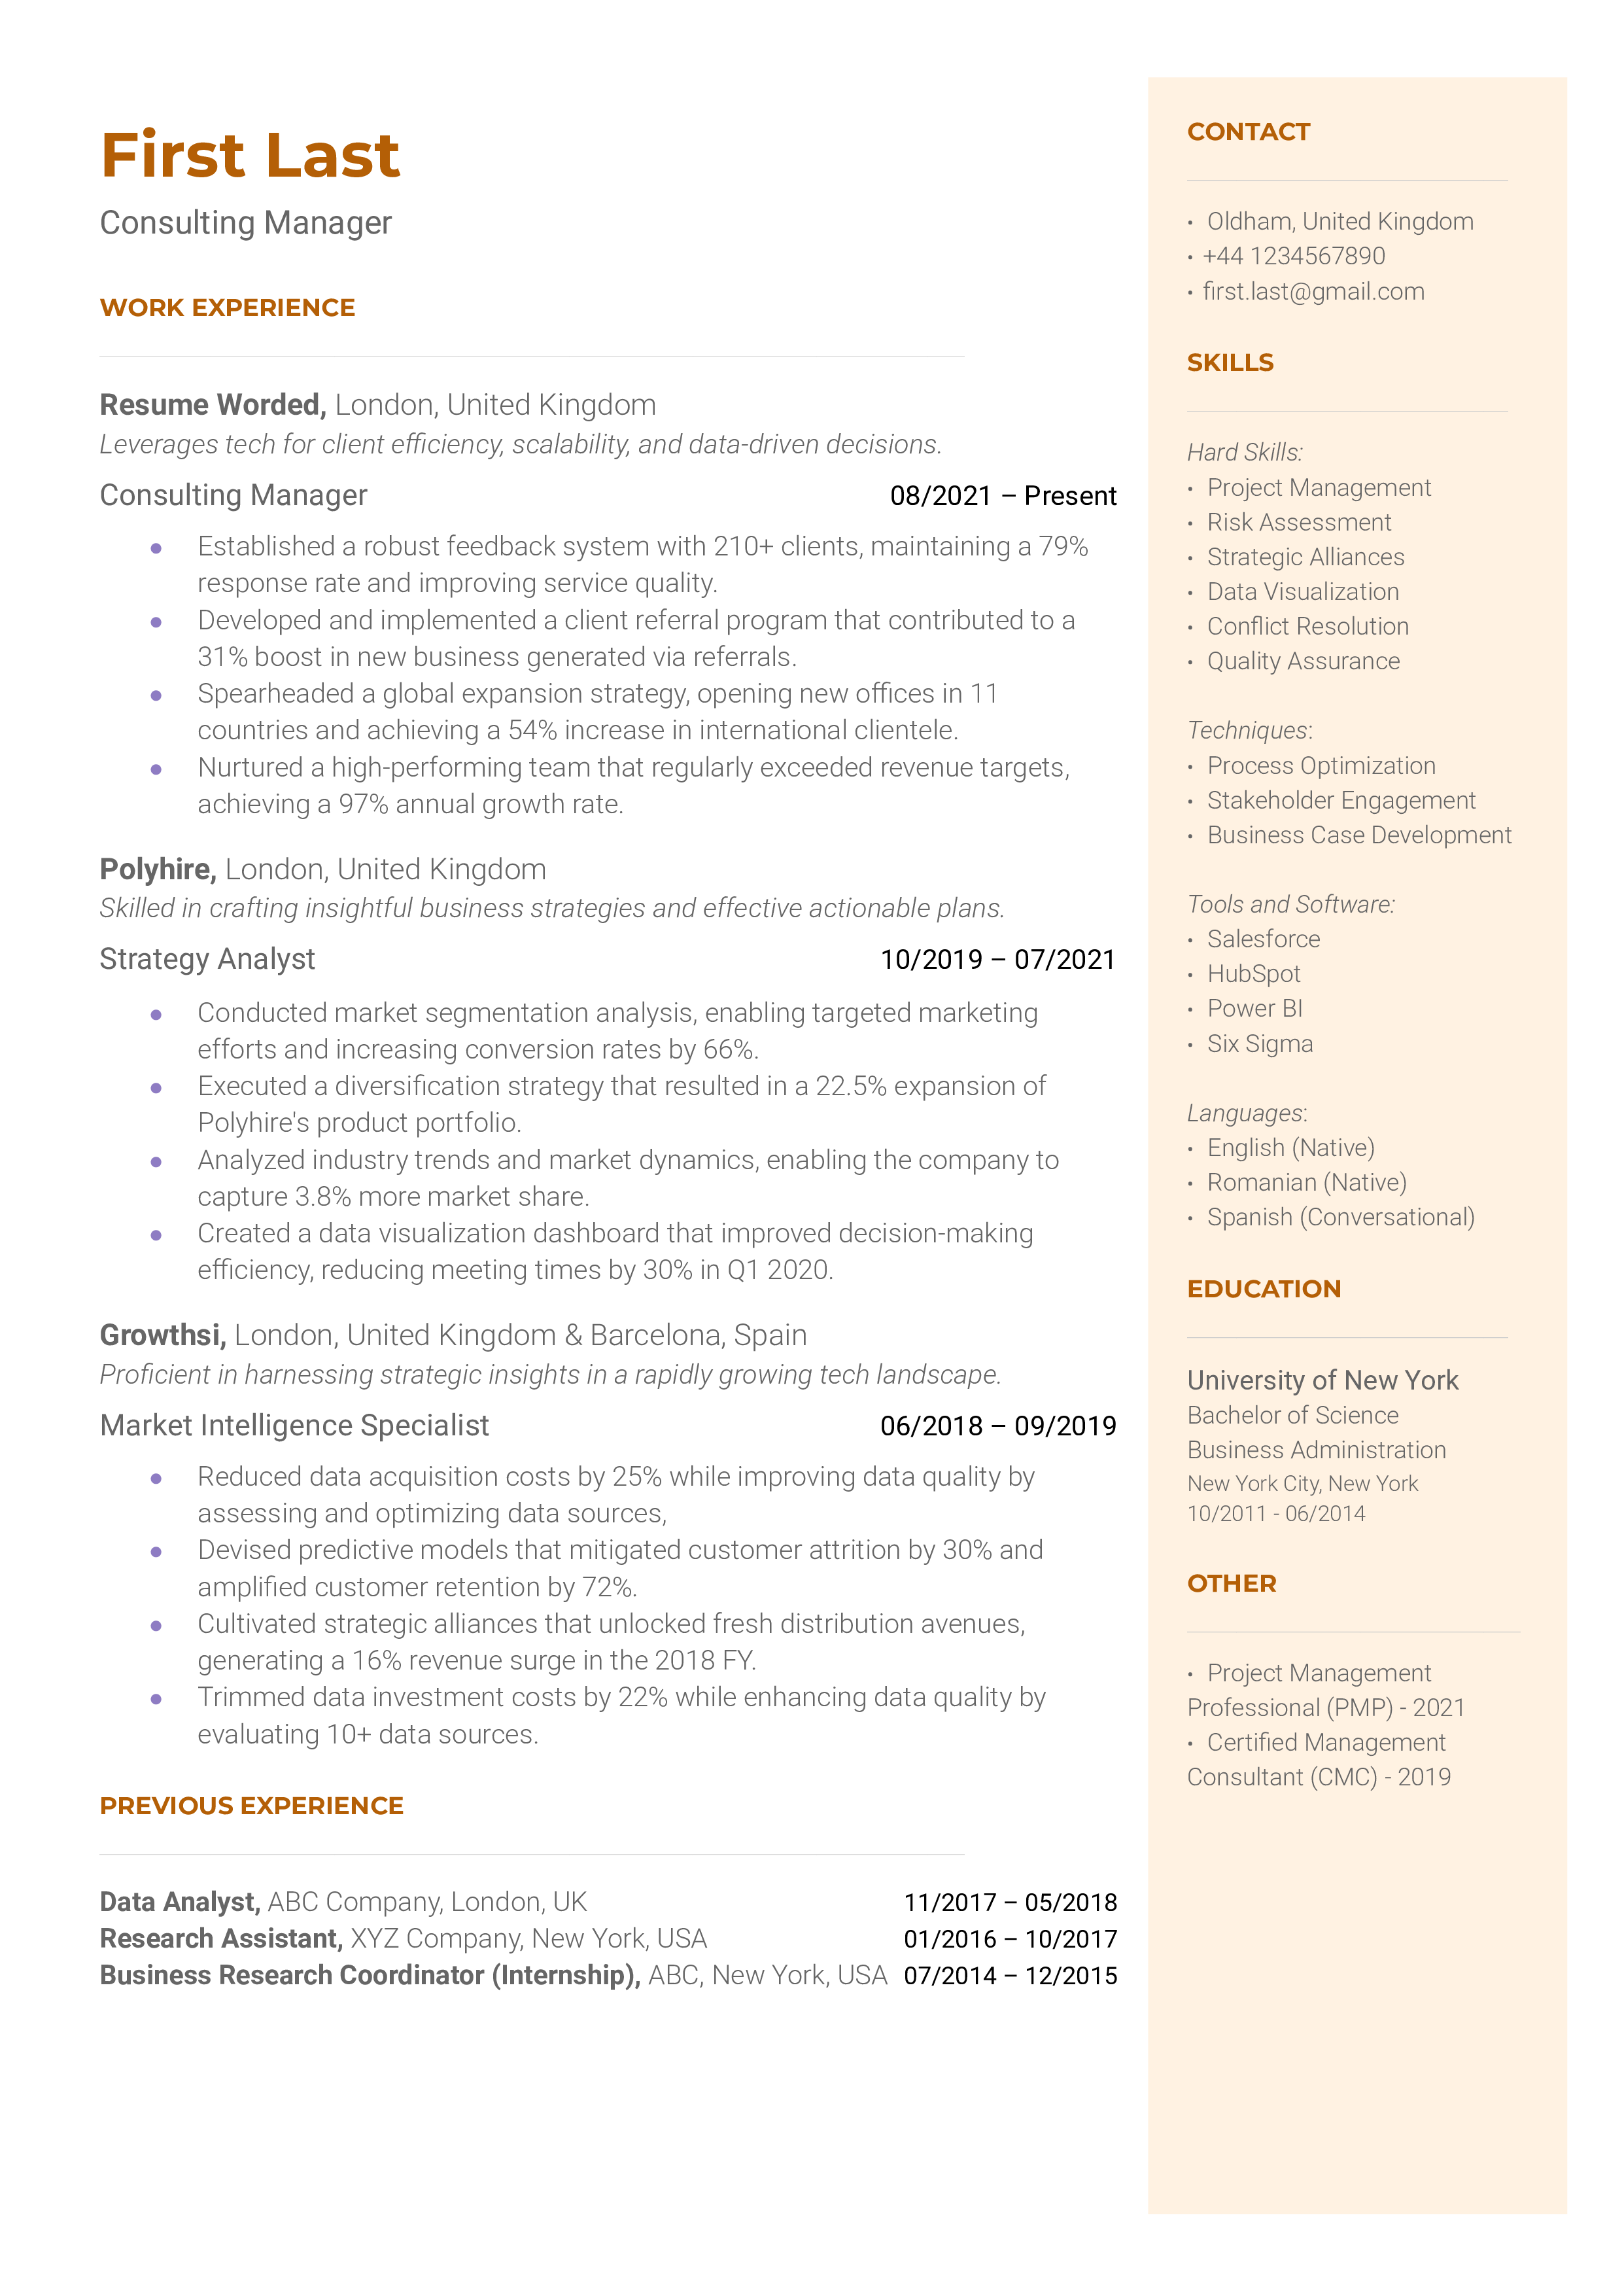 A conversational-style resume for a Consulting Manager role, emphasizing implementation skills and stakeholder management.